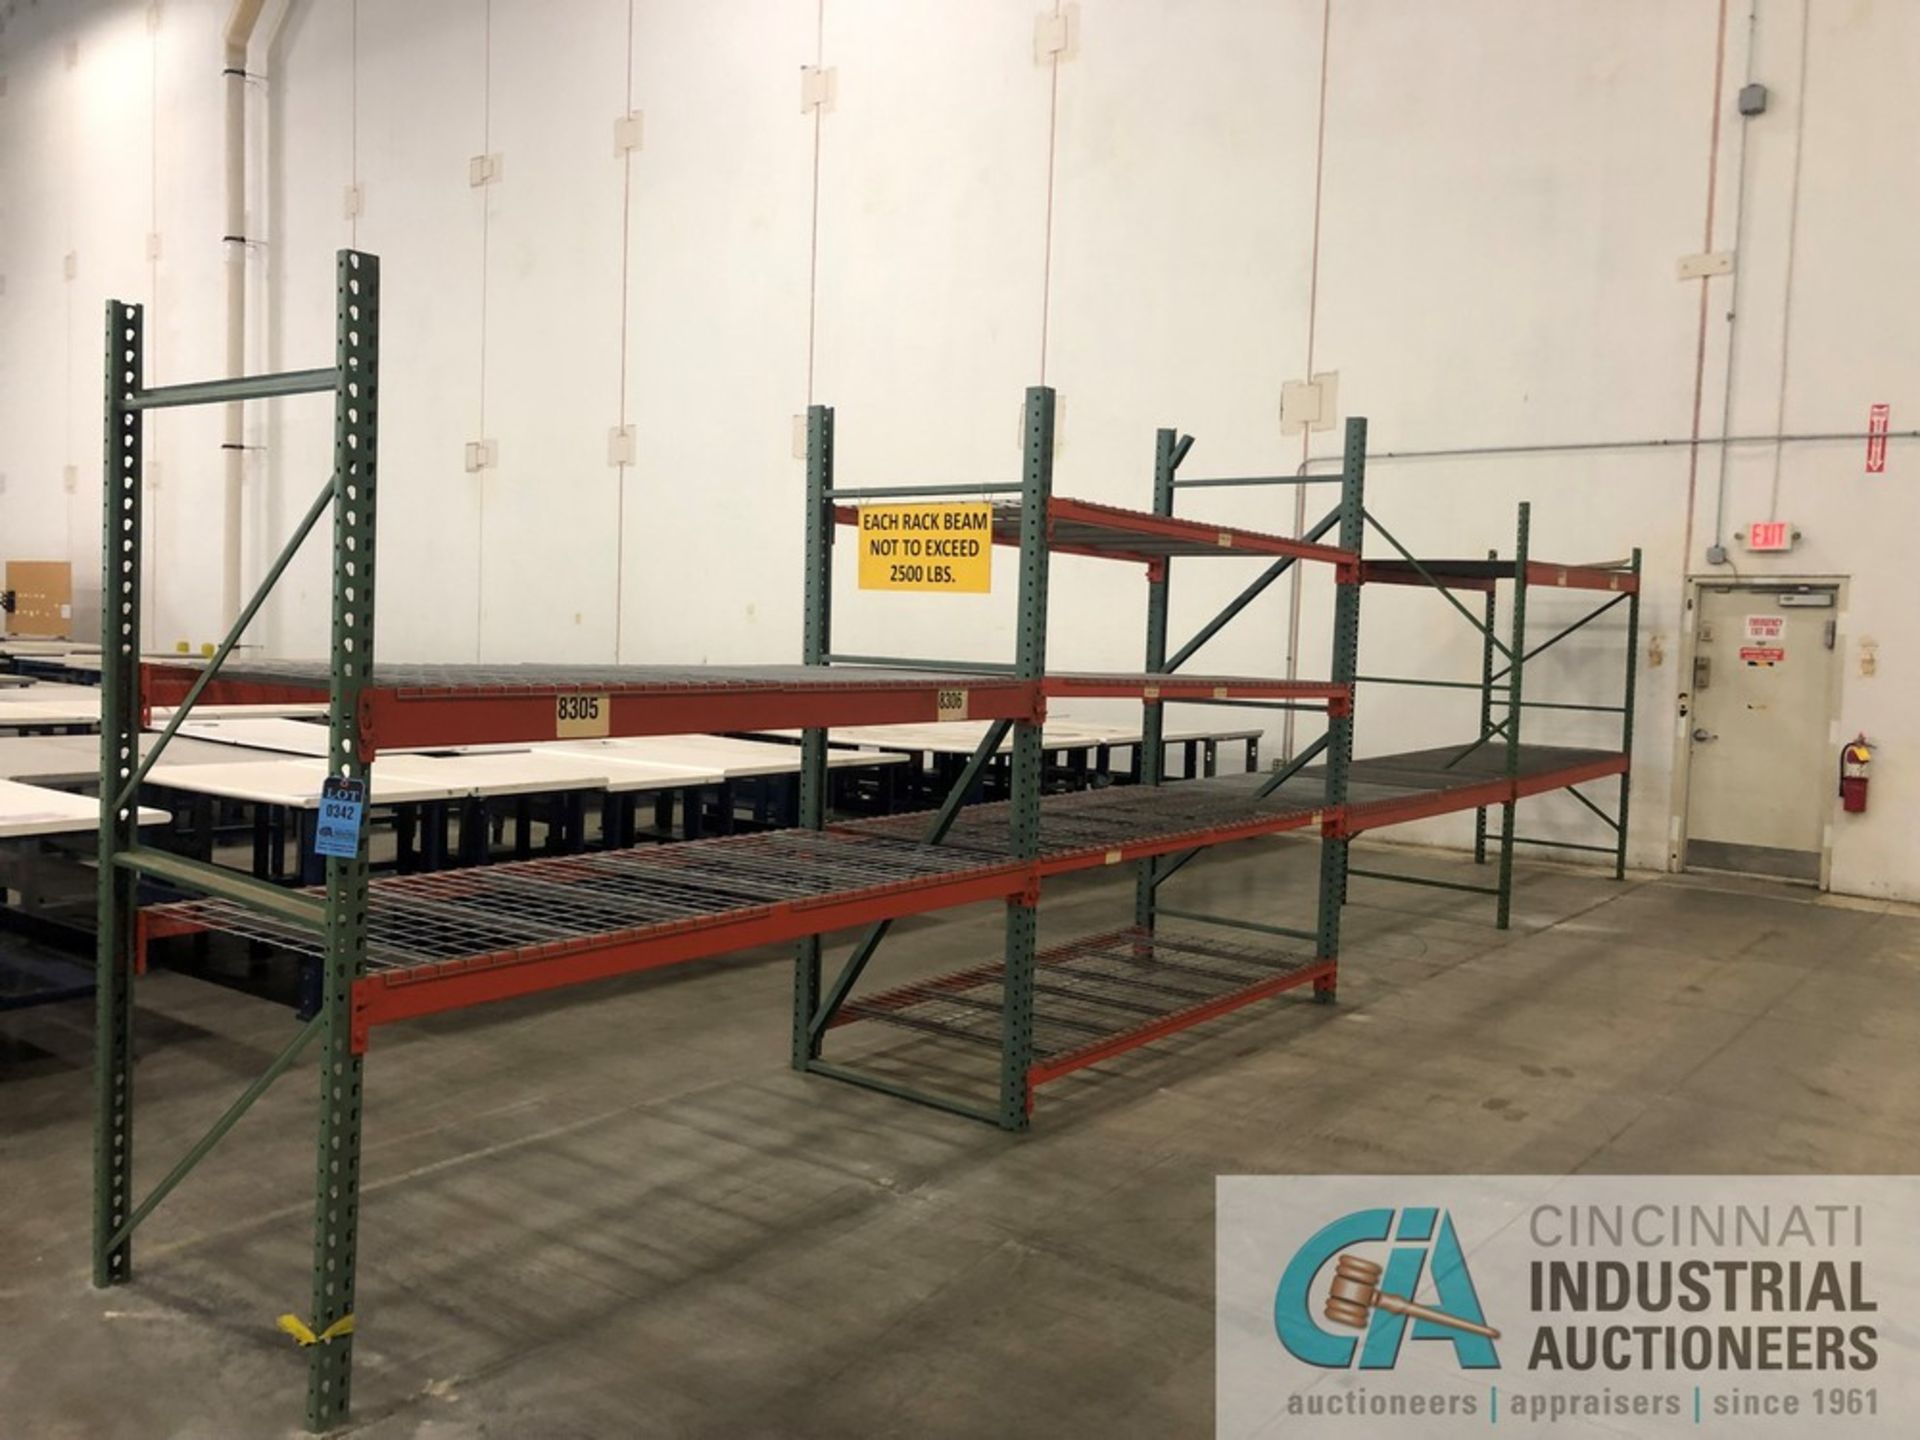 SECTIONS 42" X 96" X 90" HIGH PALLET RACK (5) UPRIGHTS, (16) CROSS BEAMS, (18) 43" X 46" WIRE DECK